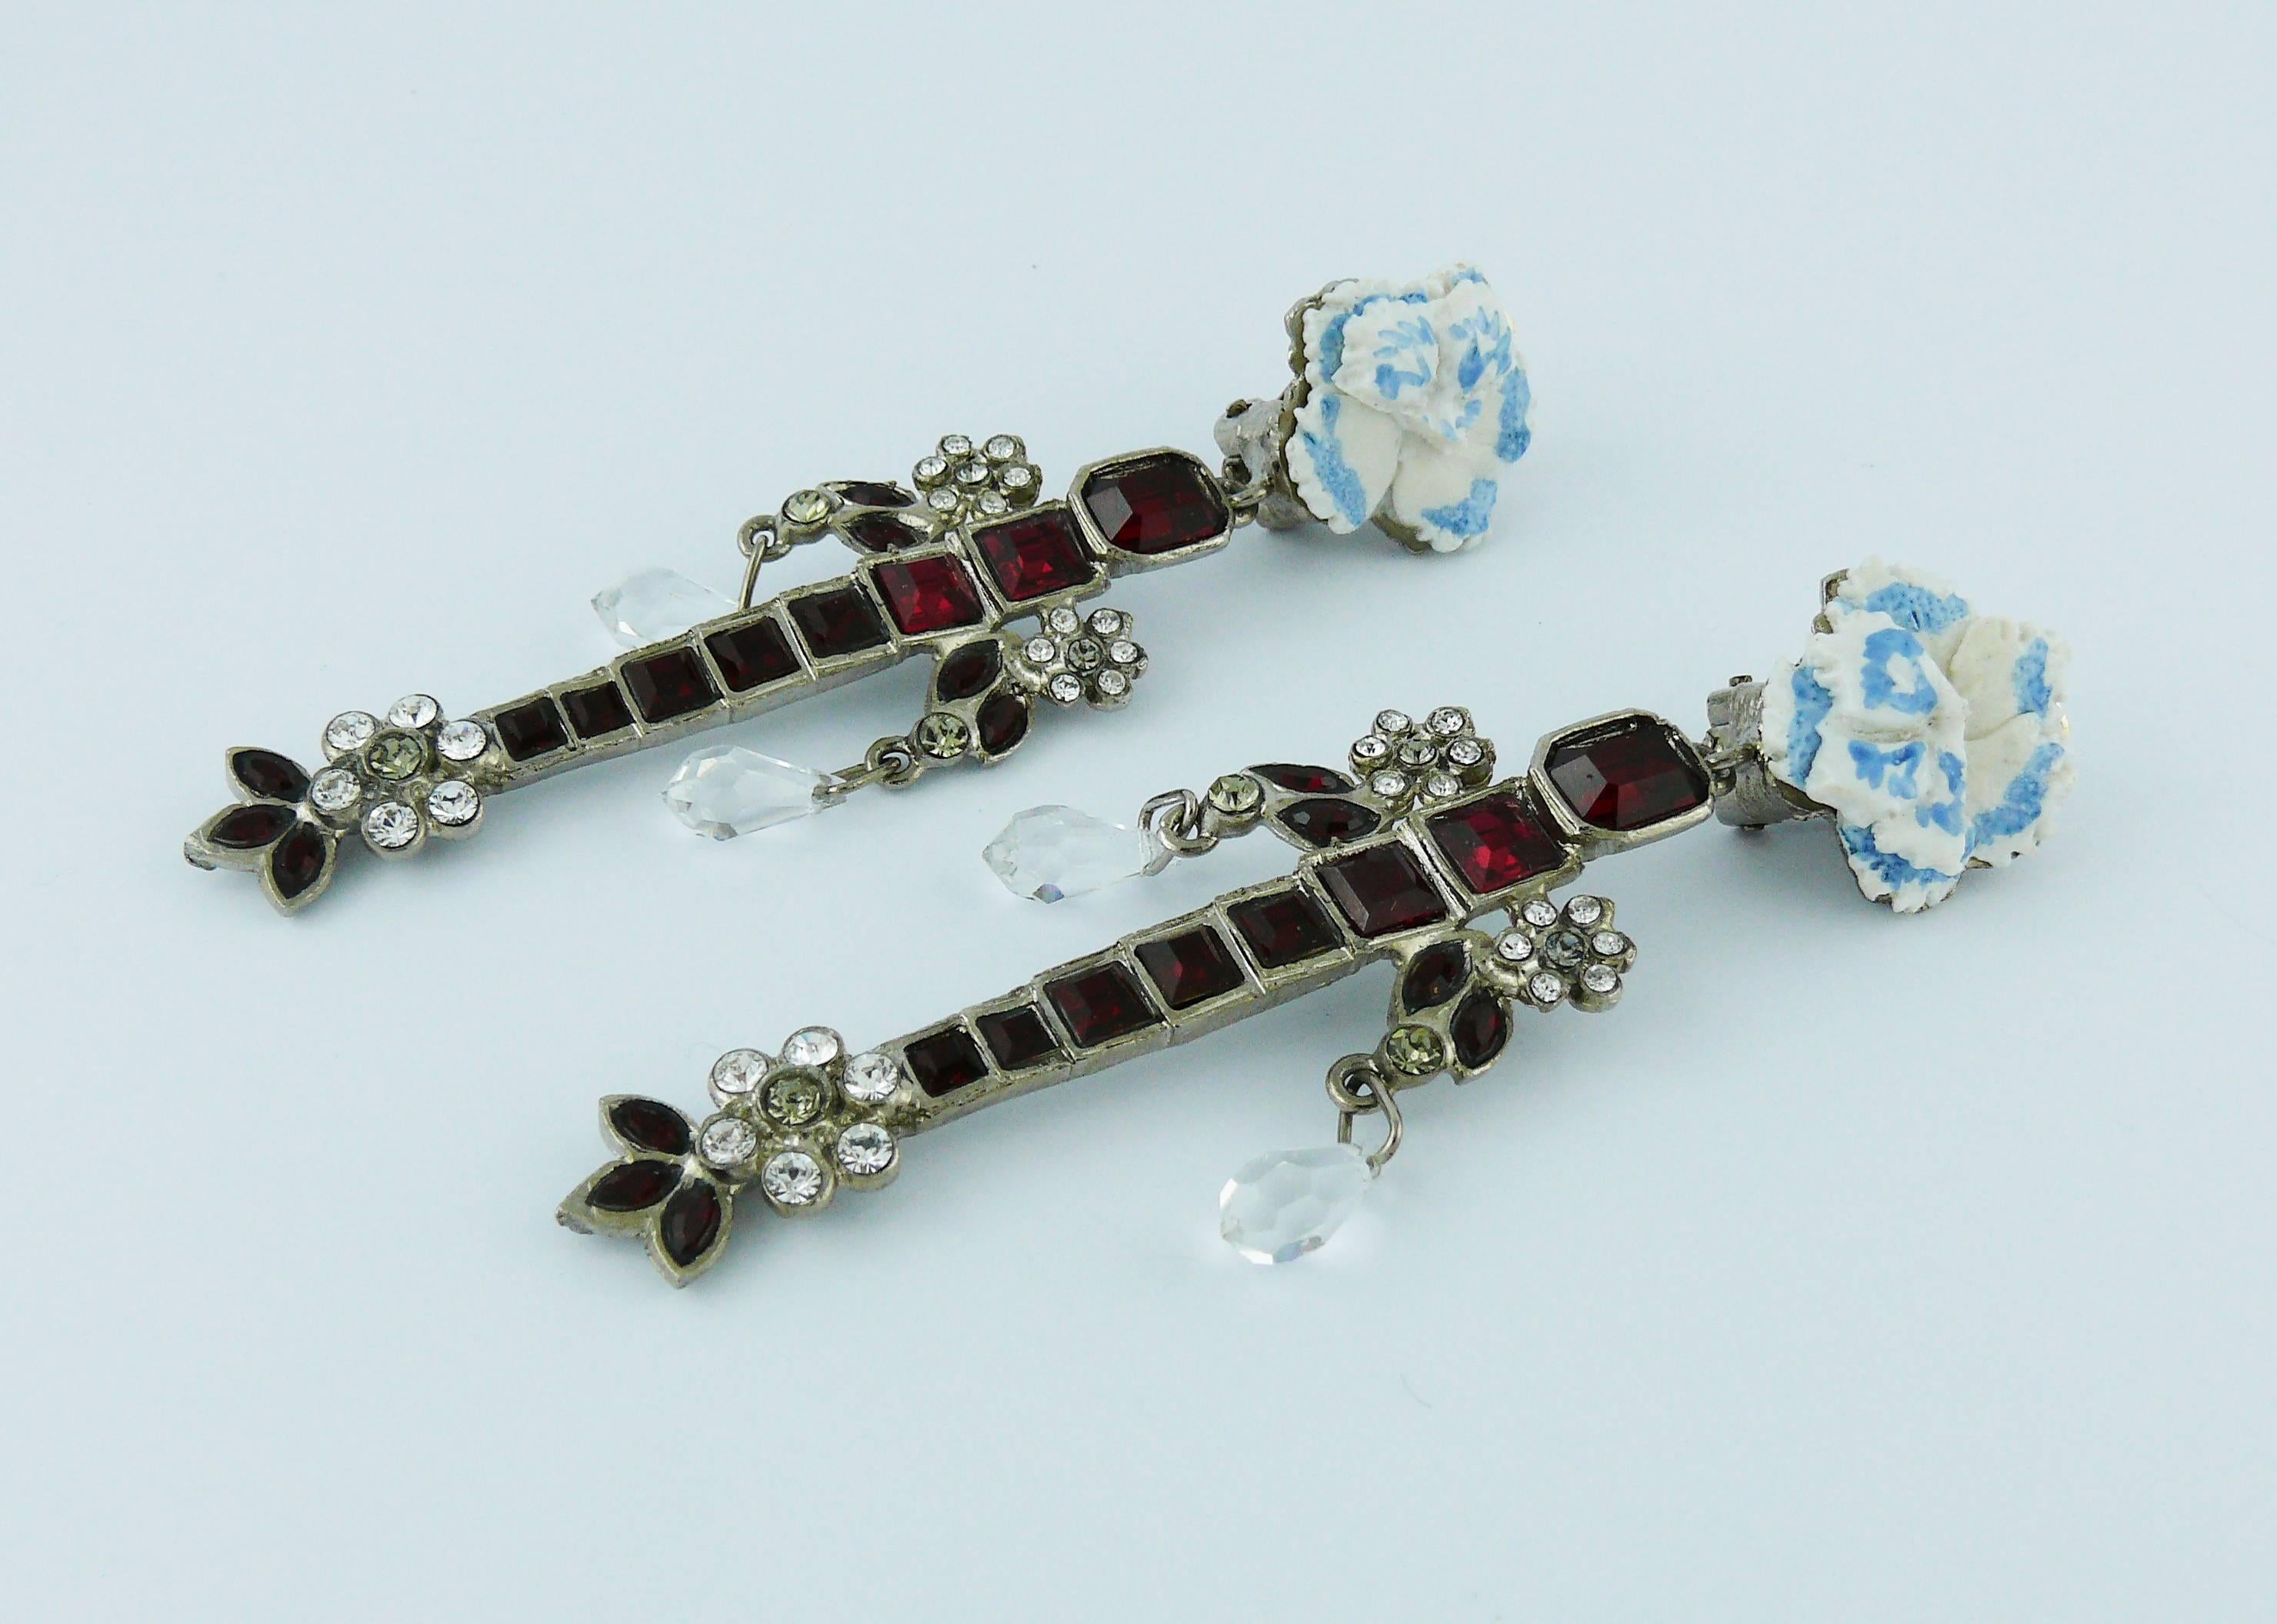 CHRISTIAN LACROIX vintage silver toned dangling earrings (clip-on) featuring a porcelain flower top, ruby and clear-grey crystal embellishement.

Marked CHRISTIAN LACROIX CL Made in France.

Indicative measurements : length approx. 8.6 cm (3.39